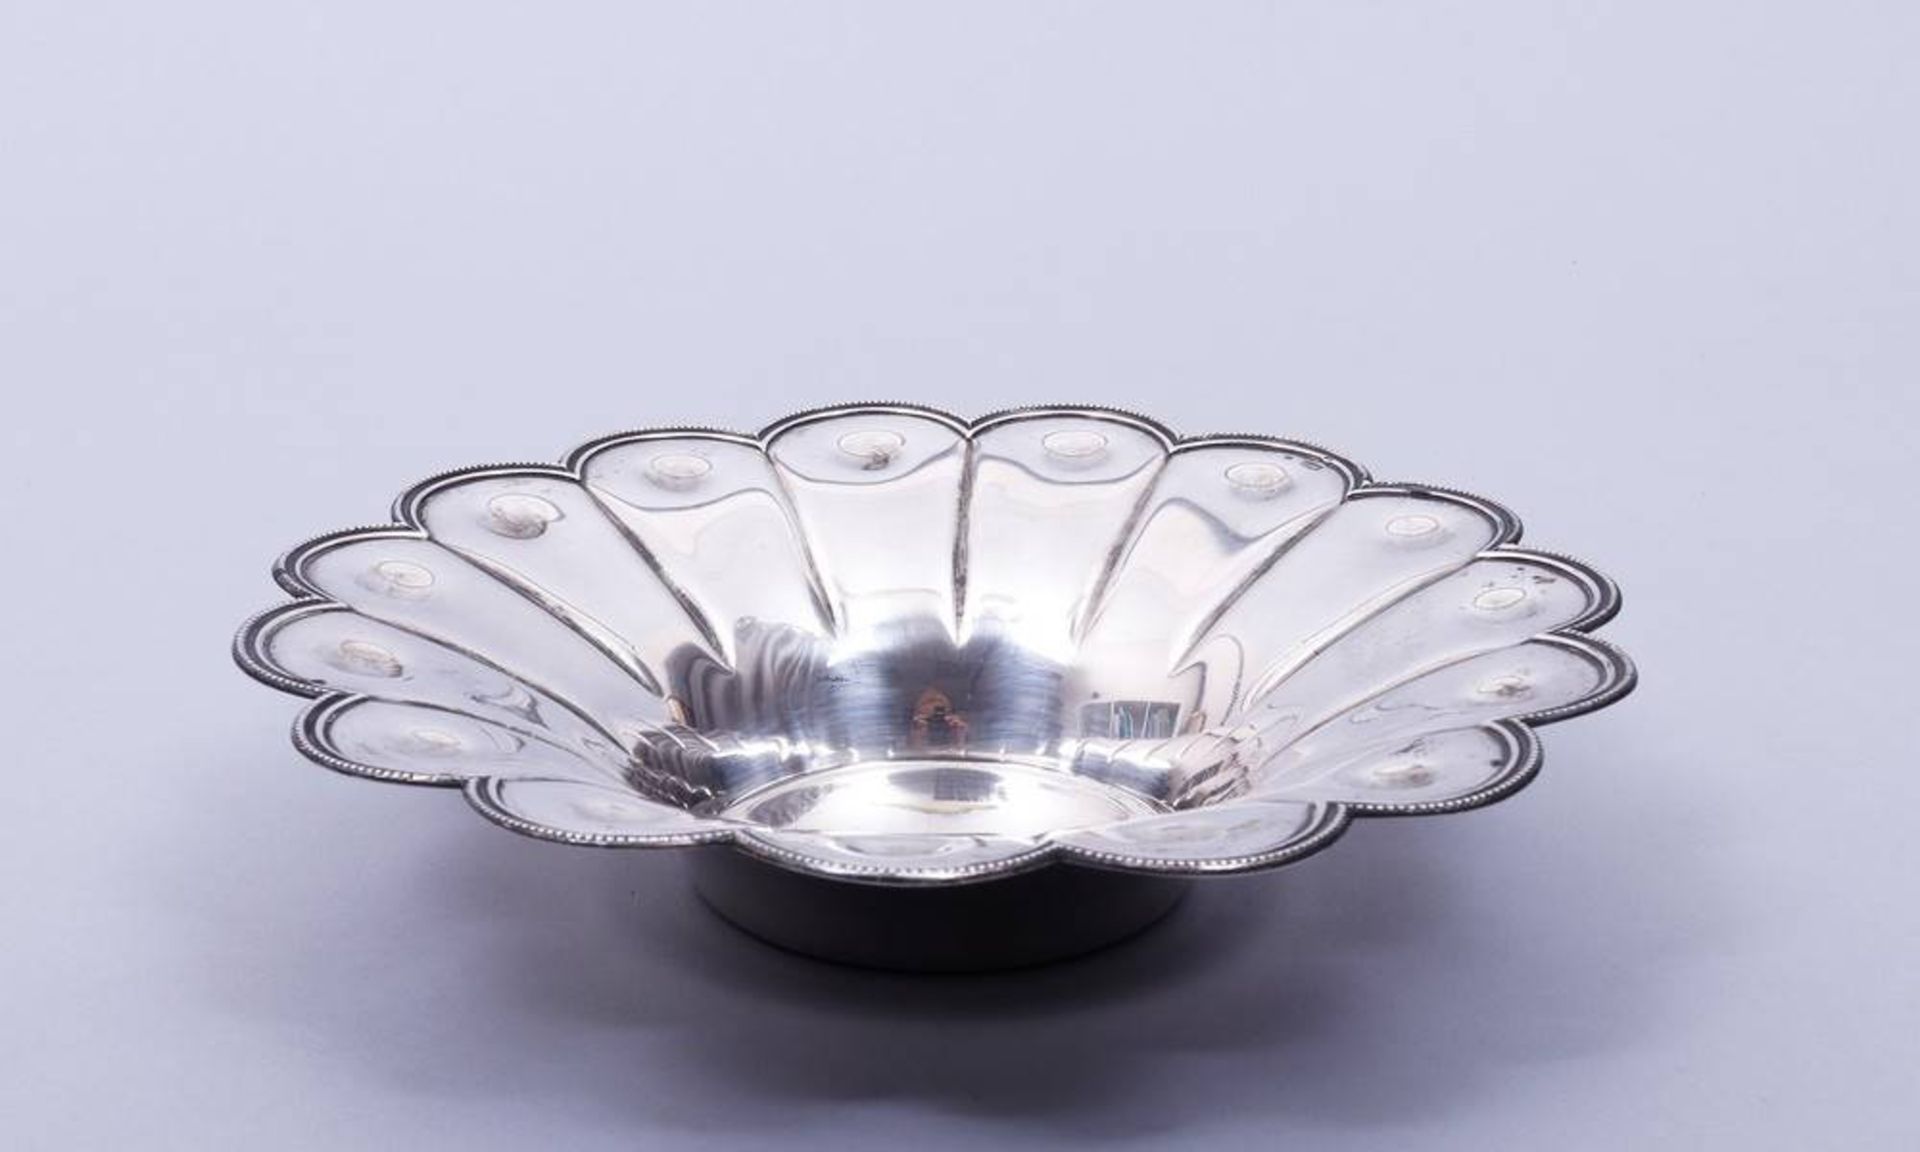 Dish, 875 silver, Lithuania, ca. 1920 